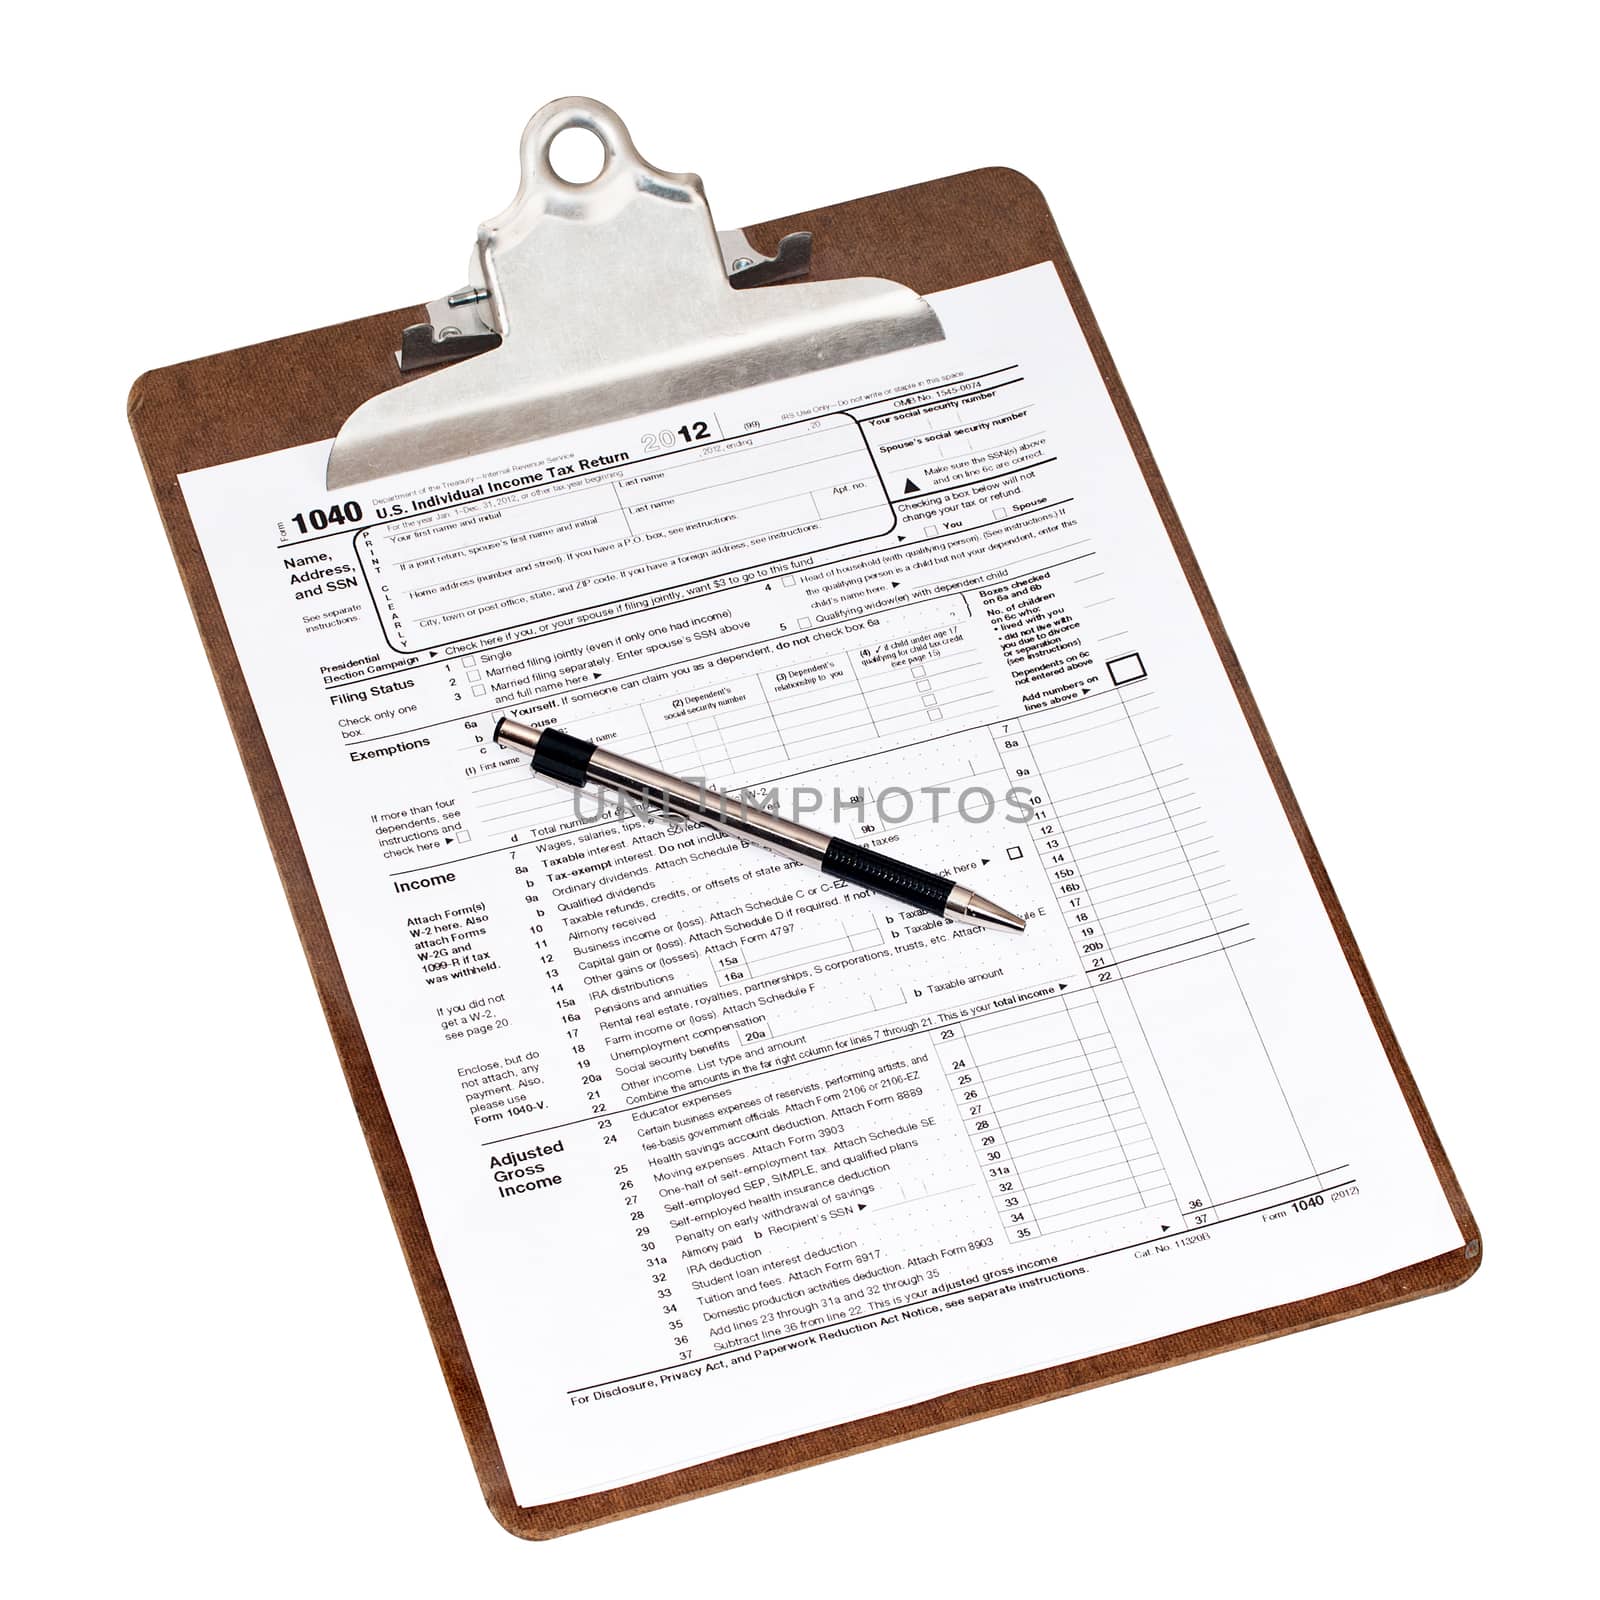 U.S. 2012 income tax form 1240 on a clipboard with a pen. Isolated on white with a clipping path.